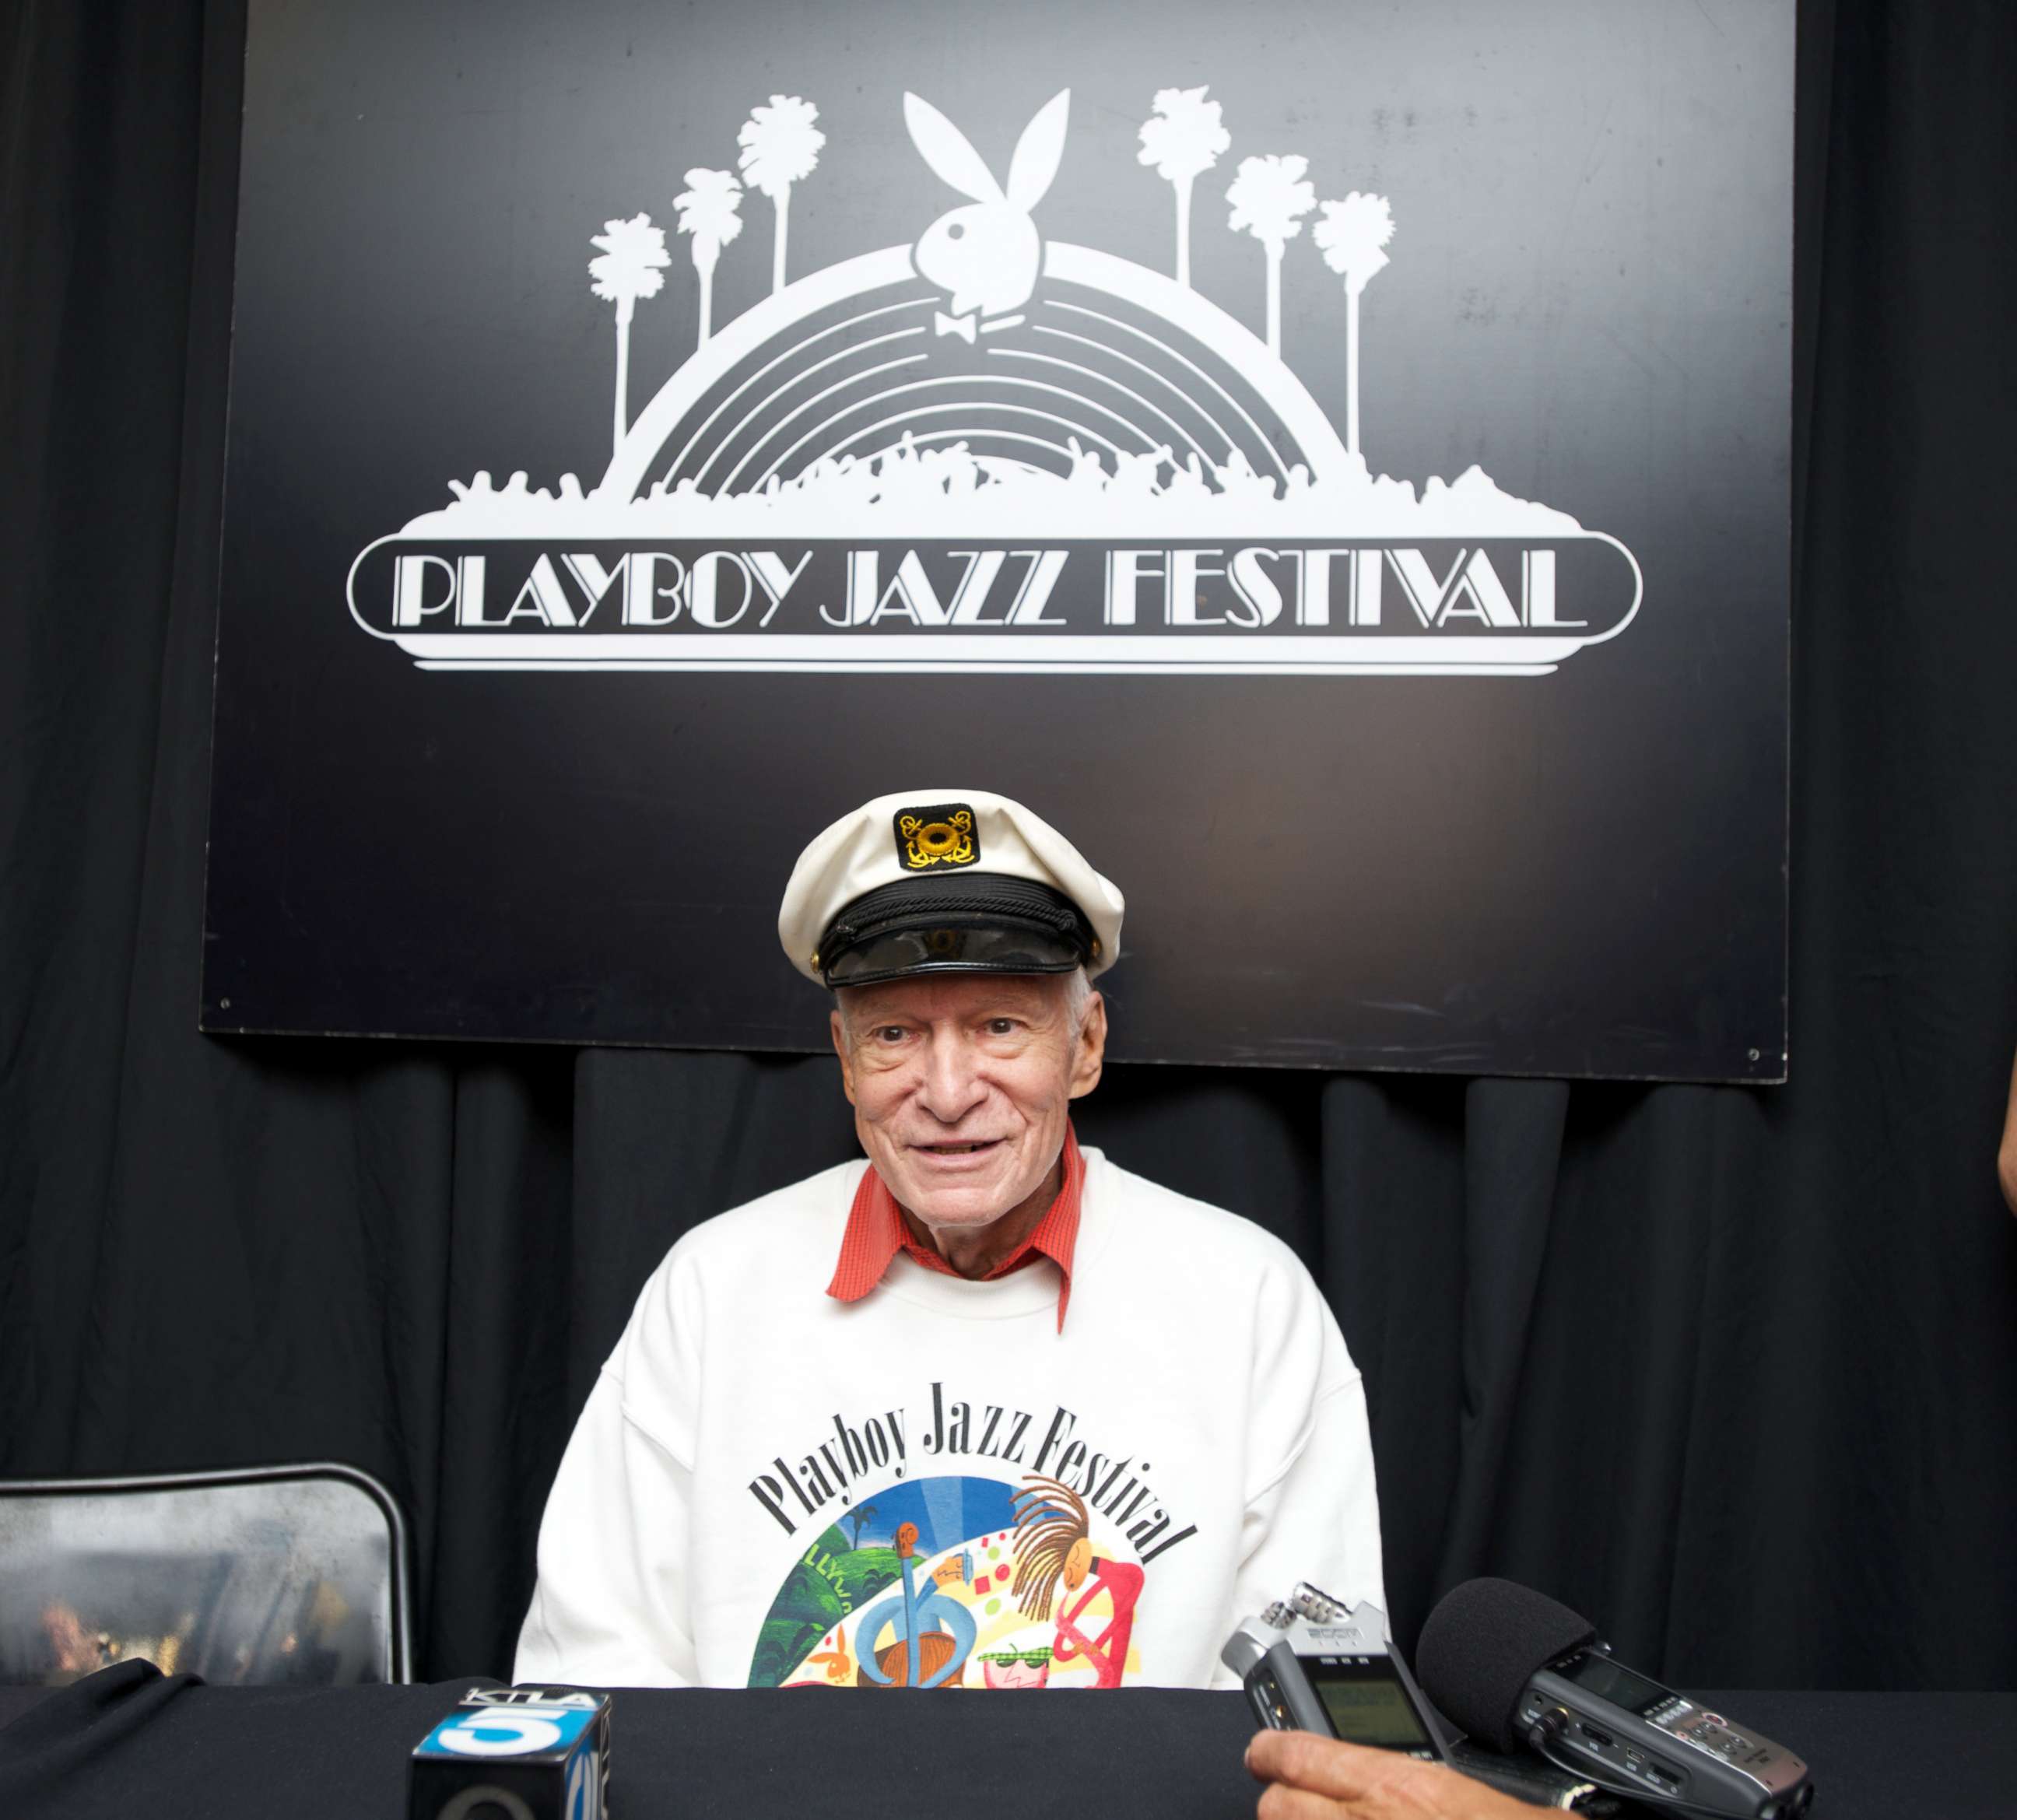 PHOTO: Publisher and Founder of Playboy Enterprises Hugh Hefner is interviewed at the 35th Annual Playboy Jazz Festival at The Hollywood Bowl, June 15, 2013 in Los Angeles. 